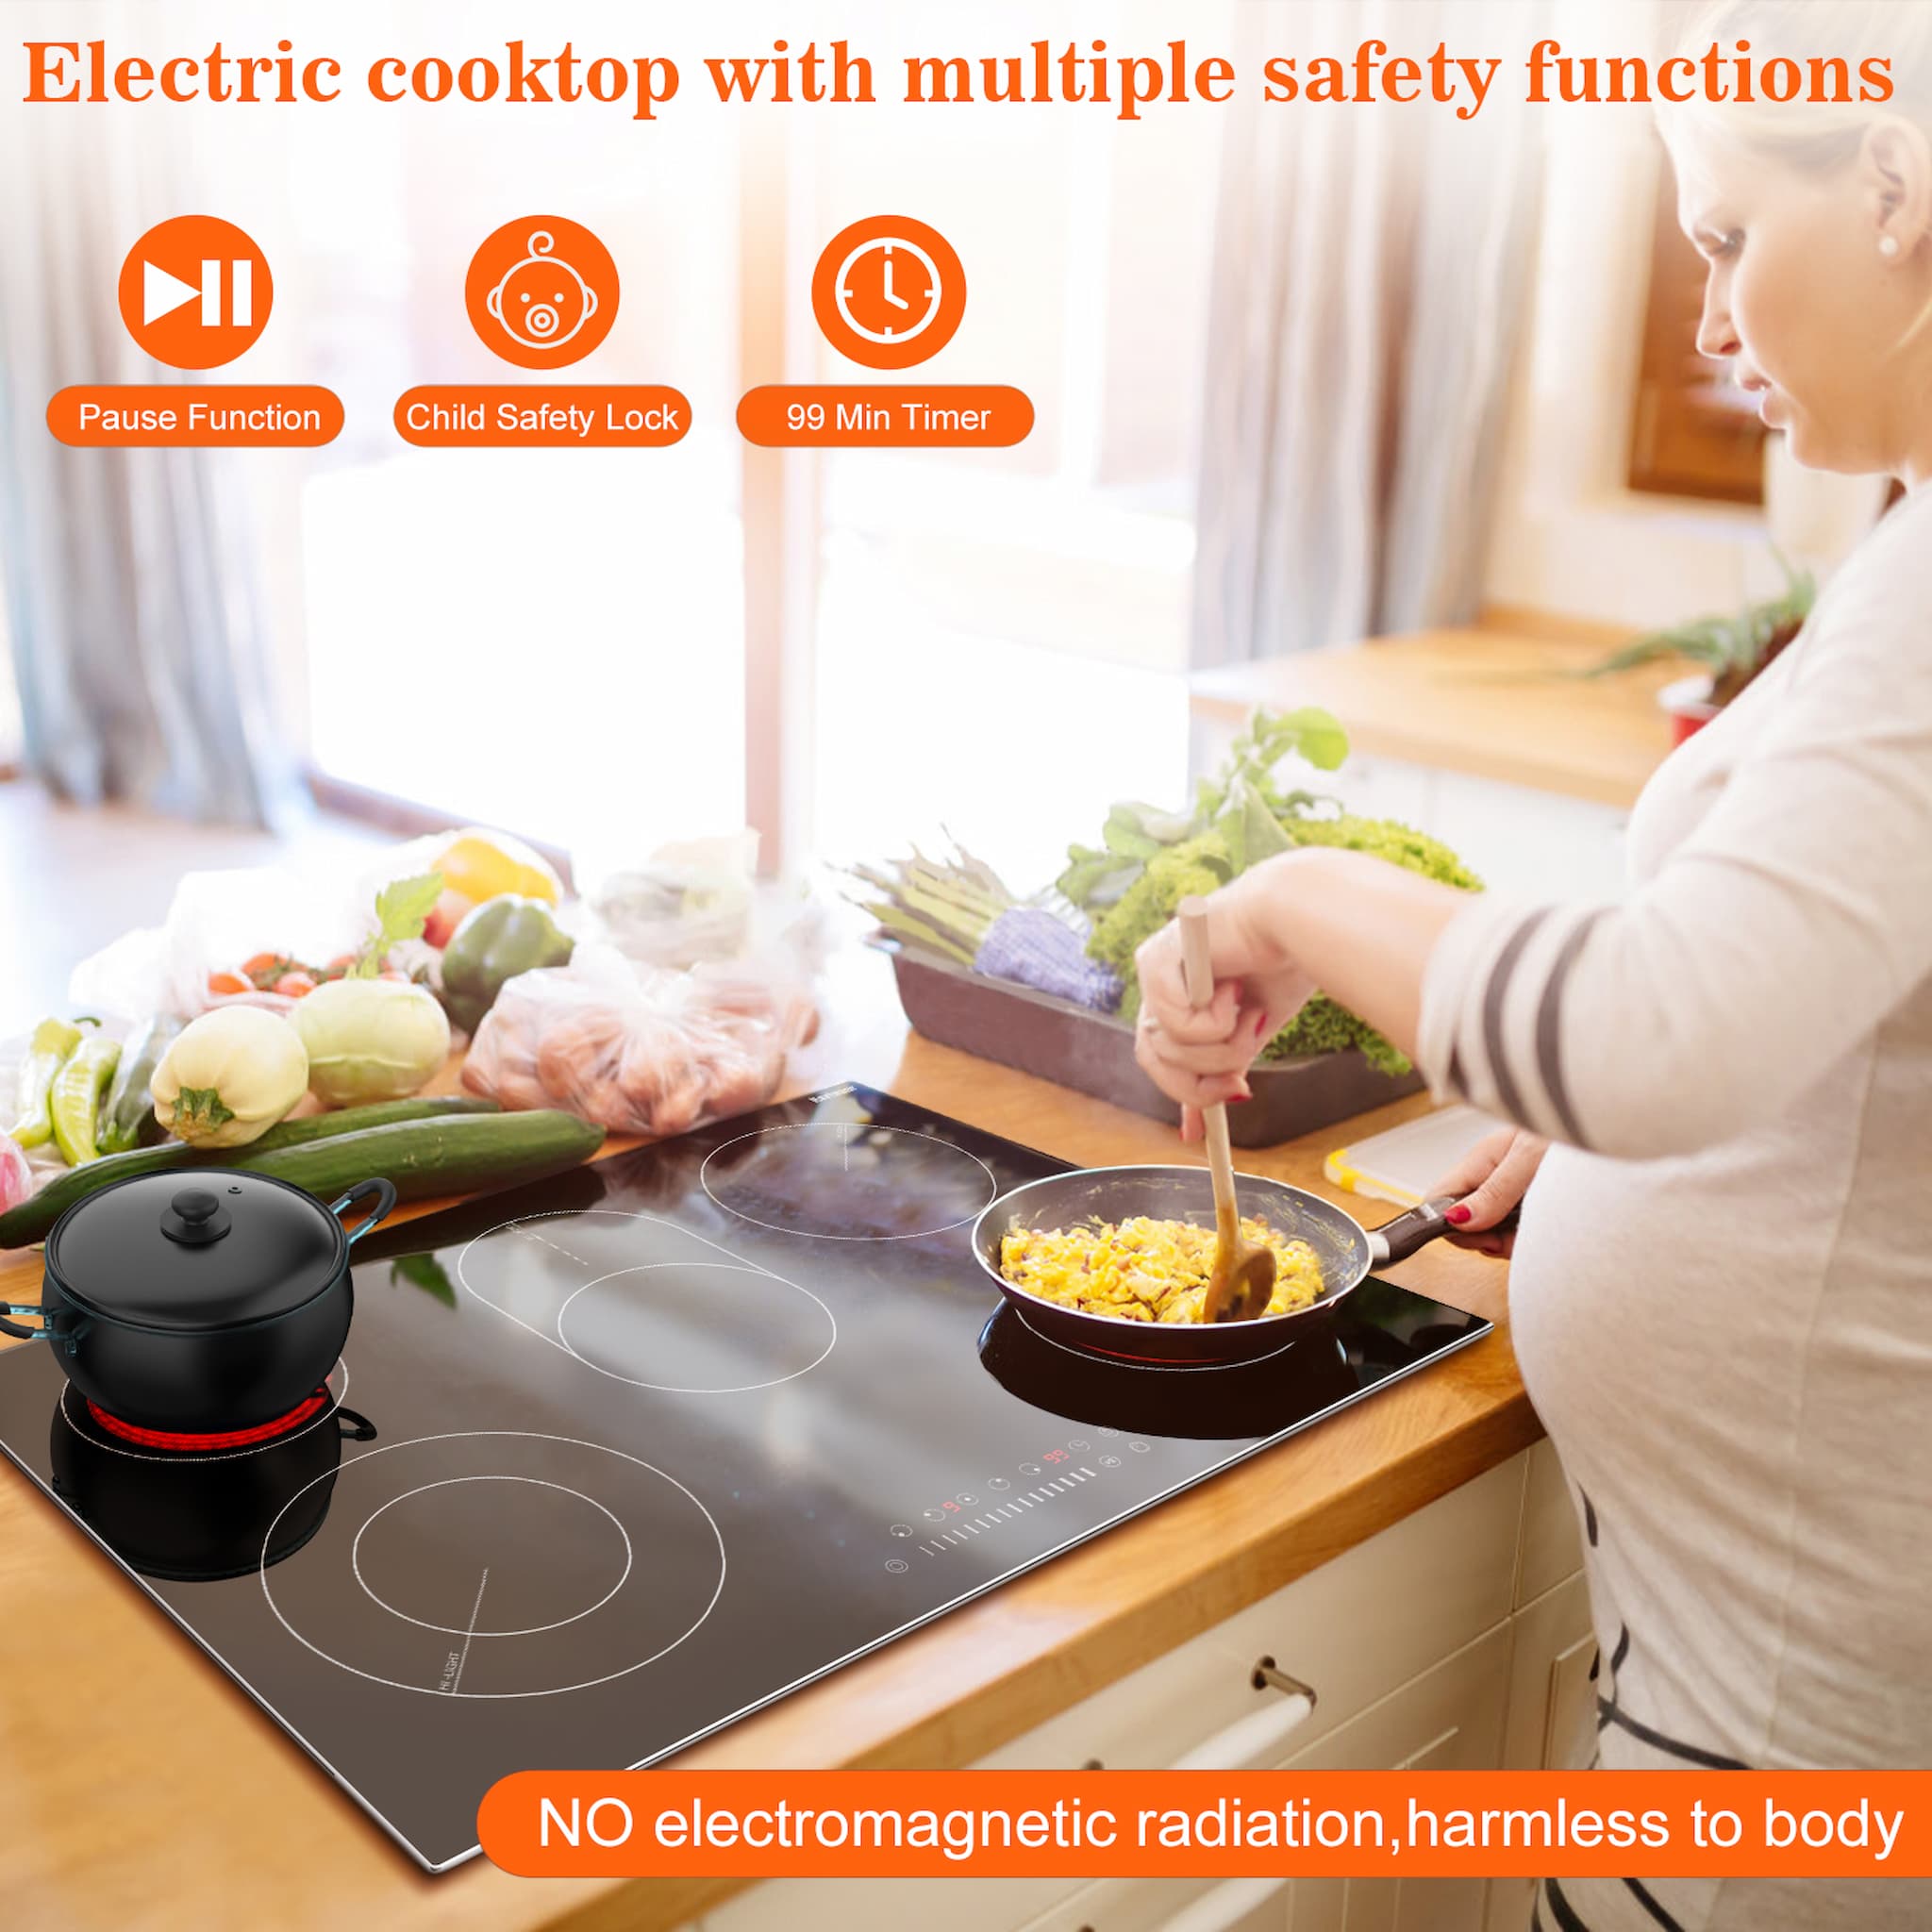 his sensor touch control electric cooktop has 9 power levels, for precision to switch into different level from boil to simmer. The digital sensor touch controls help to easy control the electric cooker heating accurately.